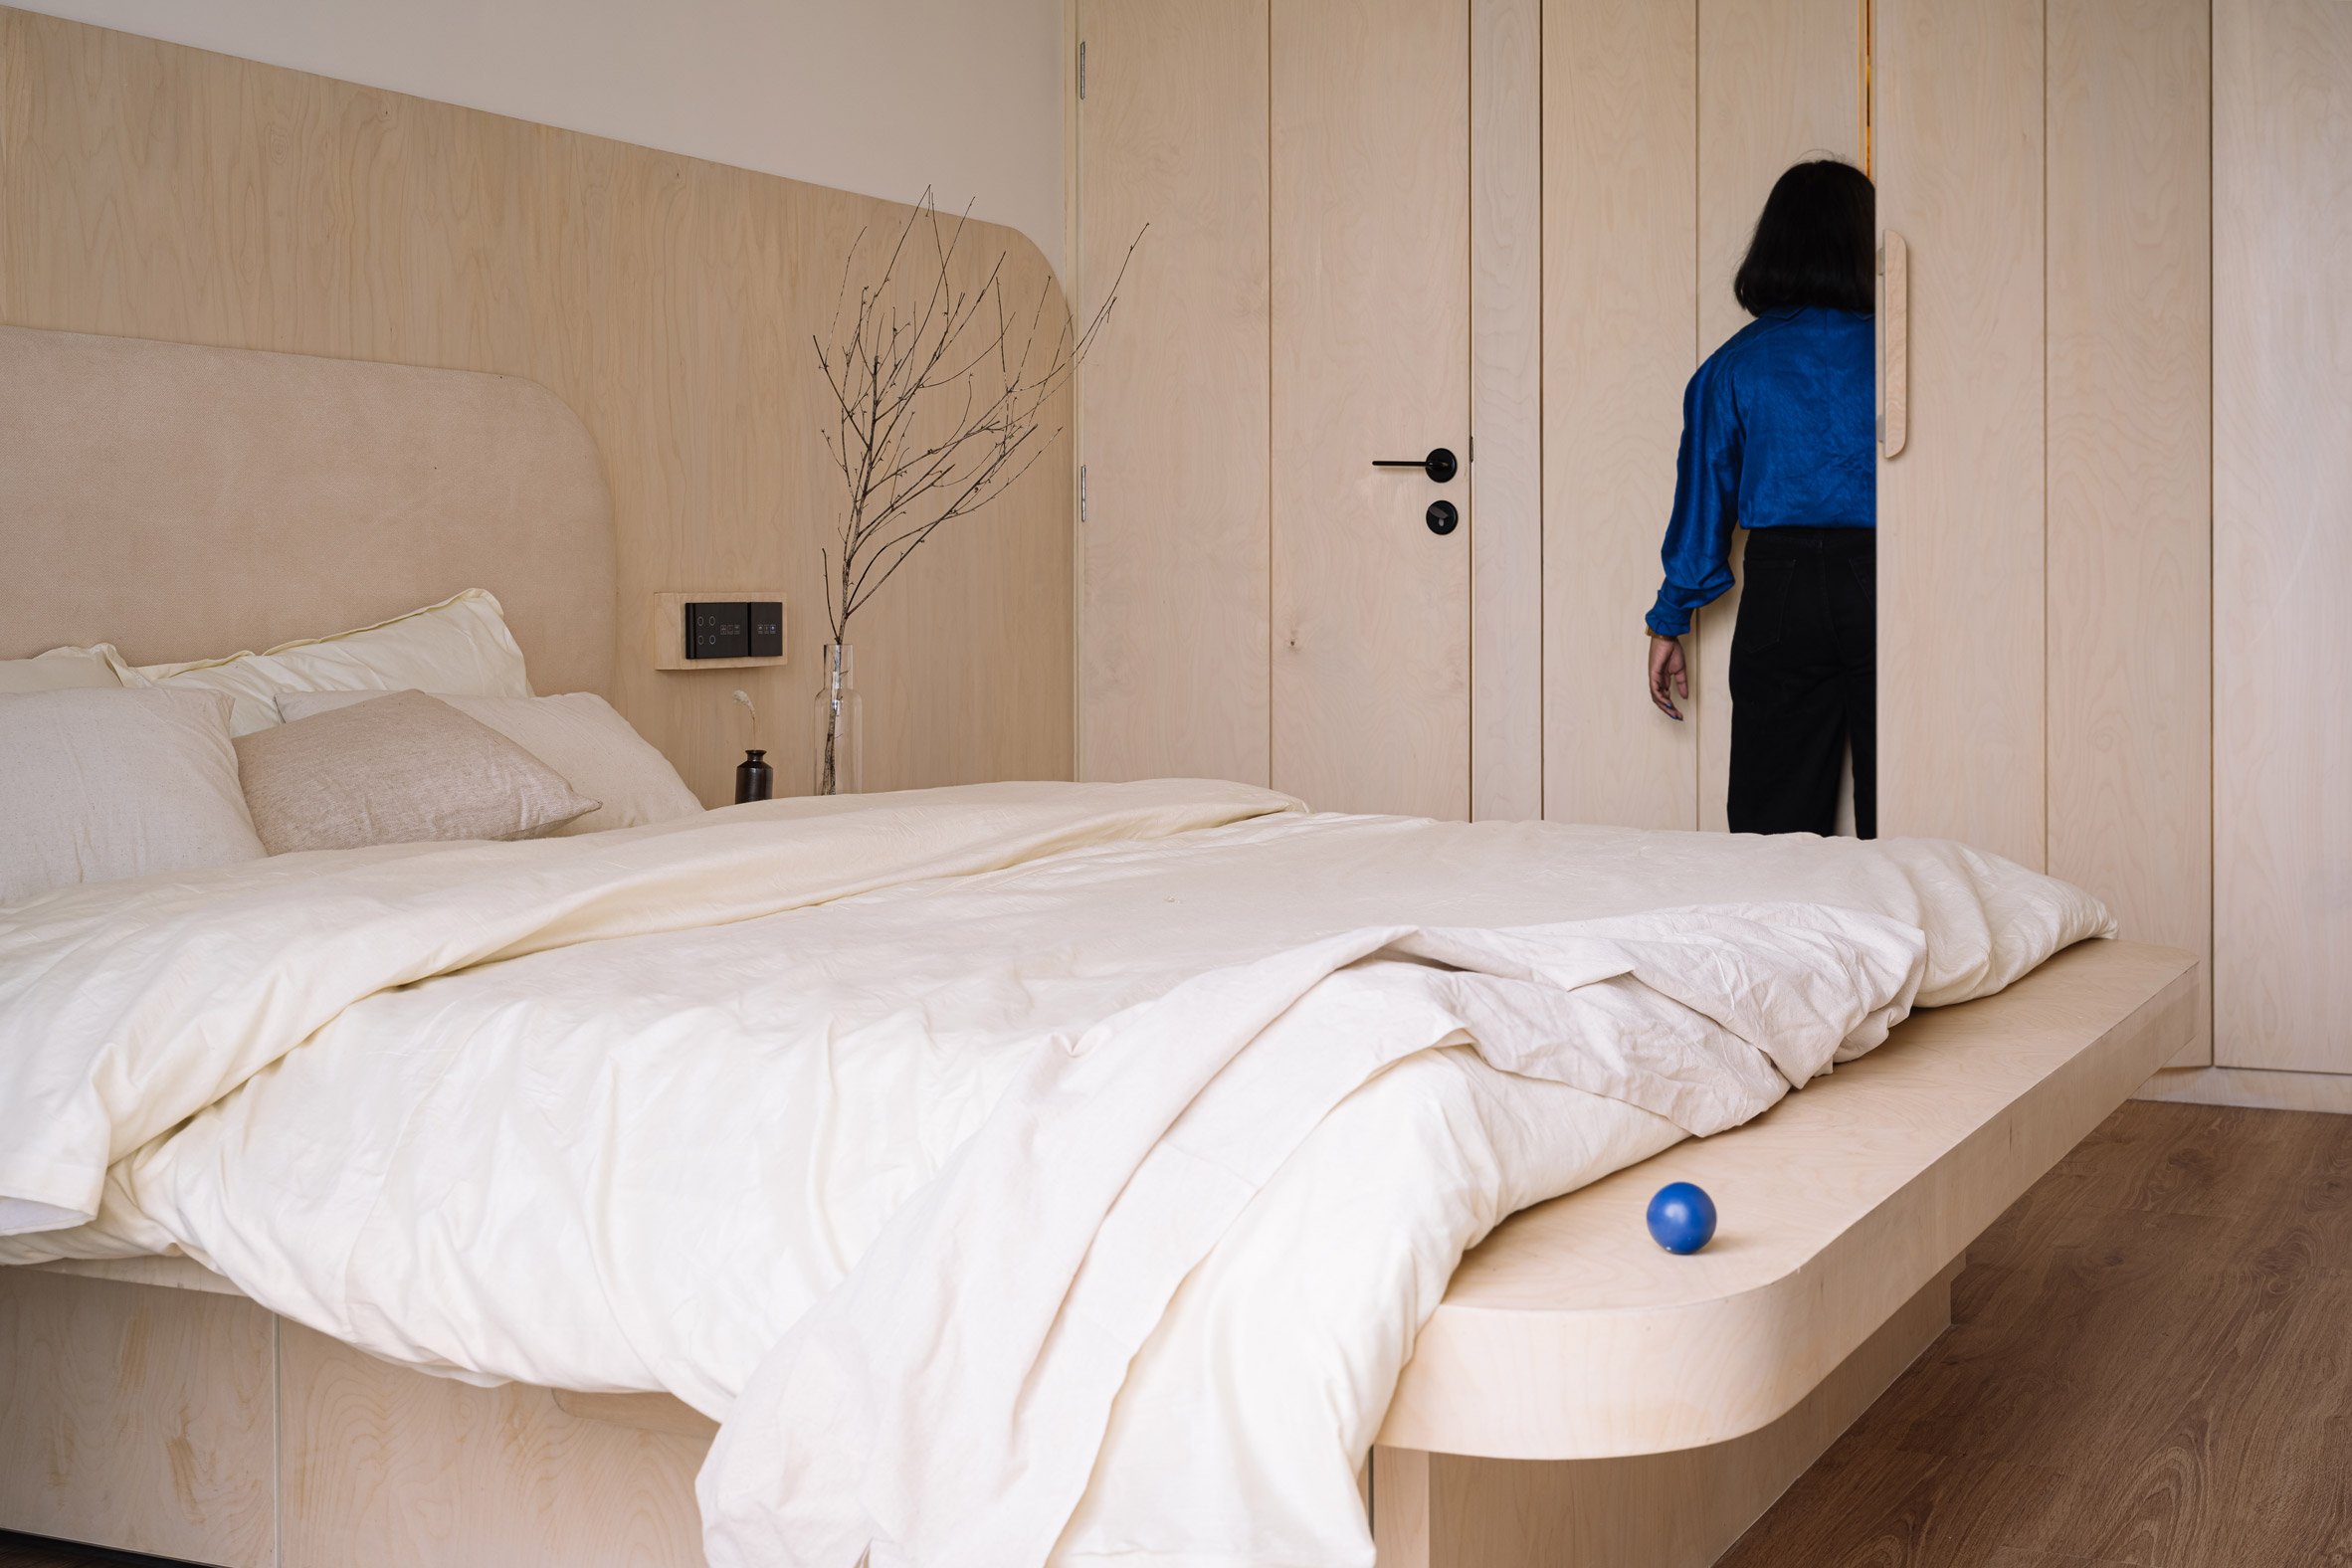 Bedroom of Out of the Blue apartment in India clad with birch plywood bed and built-in storage